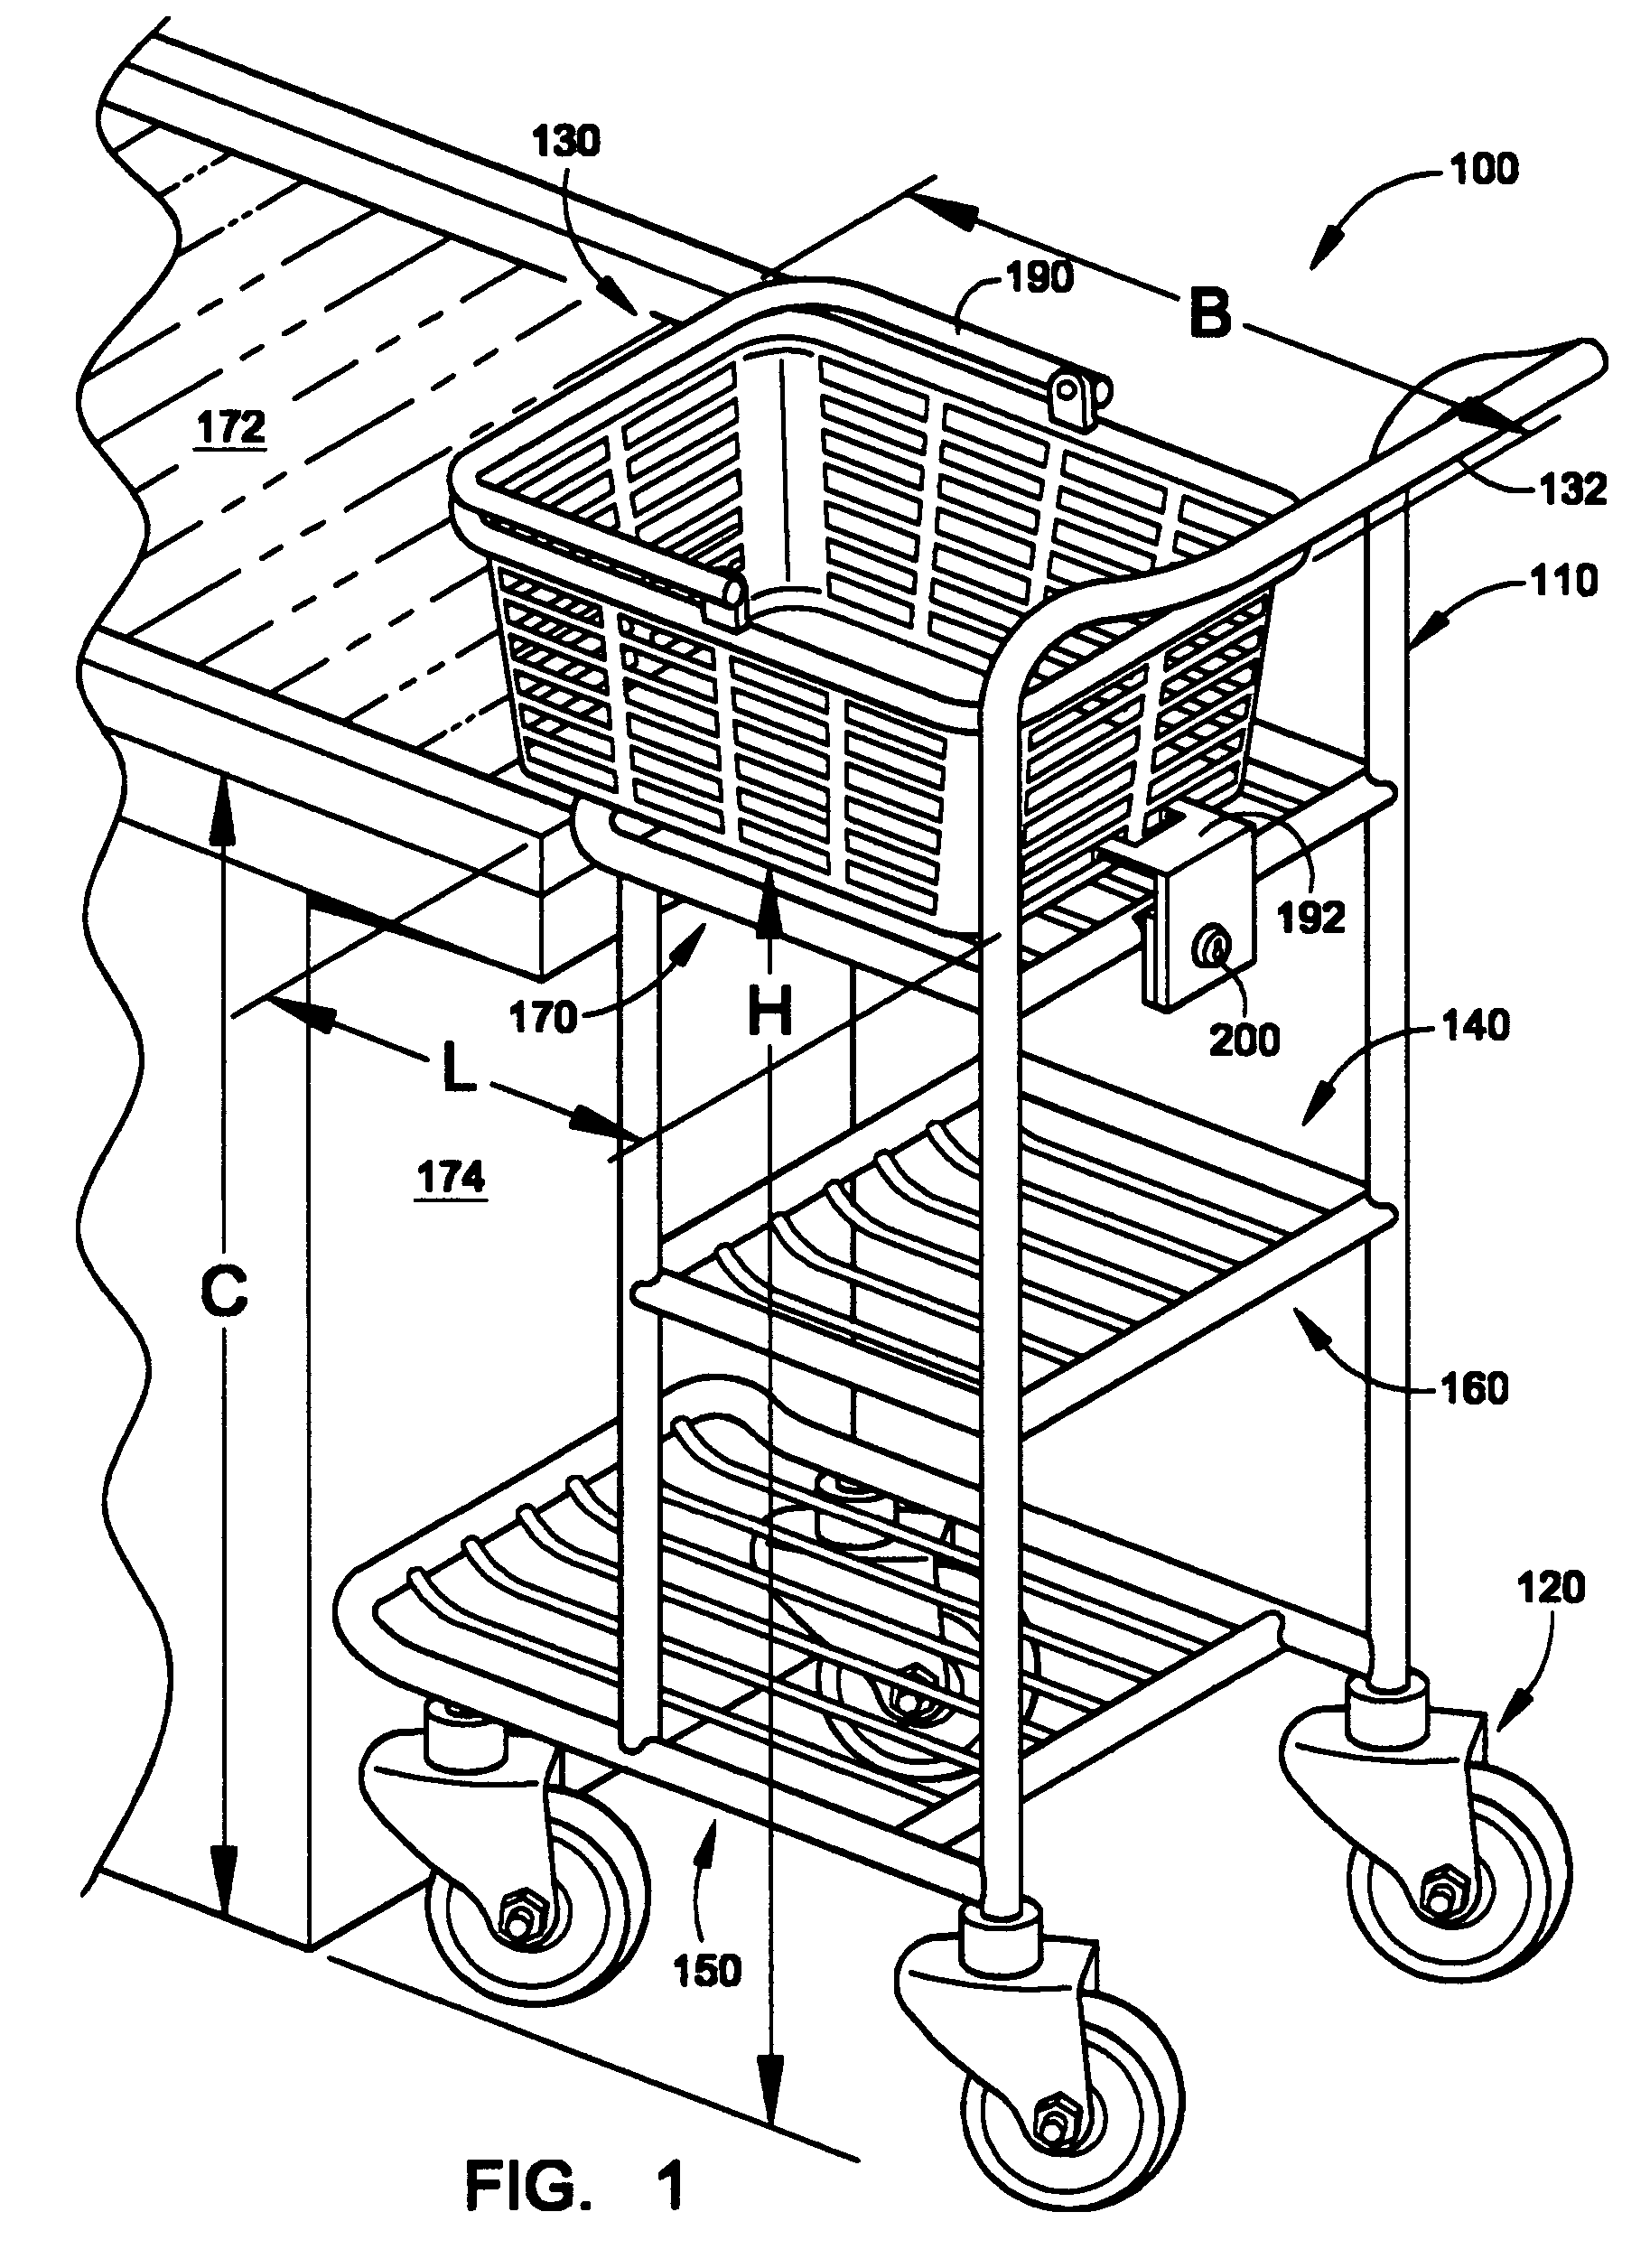 Shopping cart and method of use